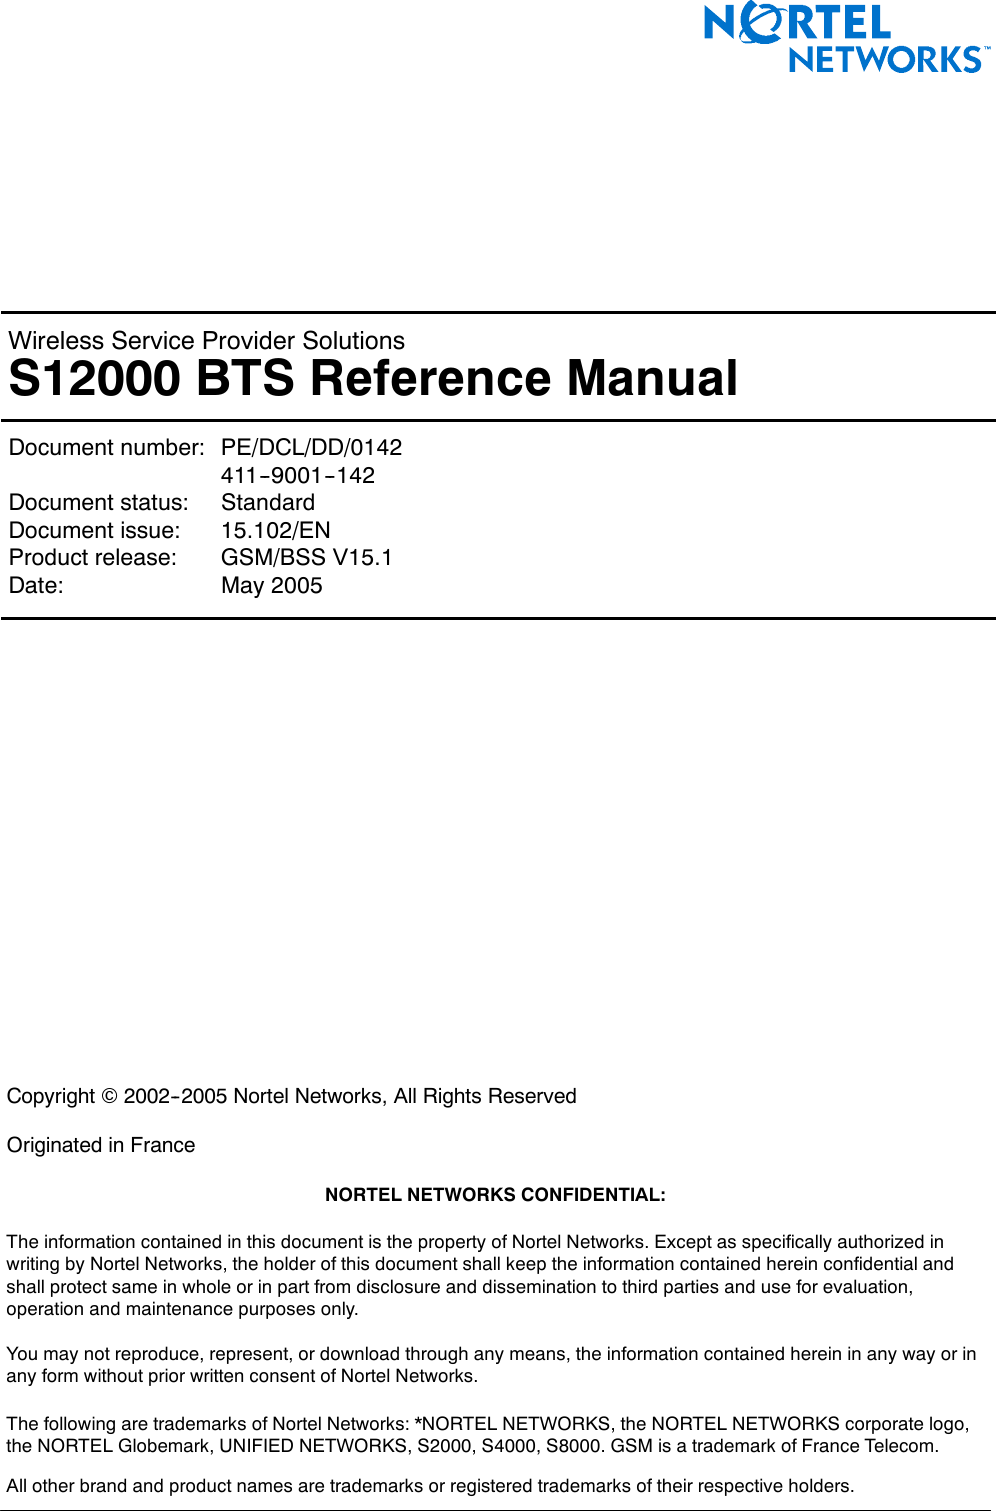 &lt; 142 &gt; : S12000 BTS Reference ManualWireless Service Provider SolutionsS12000 BTS Reference ManualDocument number: PE/DCL/DD/0142411--9001--142Document status: StandardDocument issue: 15.102/ENProduct release: GSM/BSS V15.1Date: May 2005Copyright ©2002--2005 Nortel Networks, All Rights ReservedOriginated in FranceNORTEL NETWORKS CONFIDENTIAL:The information contained in this document is the property of Nortel Networks. Except as specifically authorized inwriting by Nortel Networks, the holder of this document shall keep the information contained herein confidential andshall protect same in whole or in part from disclosure and dissemination to third parties and use for evaluation,operation and maintenance purposes only.You may not reproduce, represent, or download through any means, the information contained herein in any way or inany form without prior written consent of Nortel Networks.The following are trademarks of Nortel Networks: *NORTEL NETWORKS, the NORTEL NETWORKS corporate logo,the NORTEL Globemark, UNIFIED NETWORKS, S2000, S4000, S8000. GSM is a trademark of France Telecom.All other brand and product names are trademarks or registered trademarks of their respective holders.